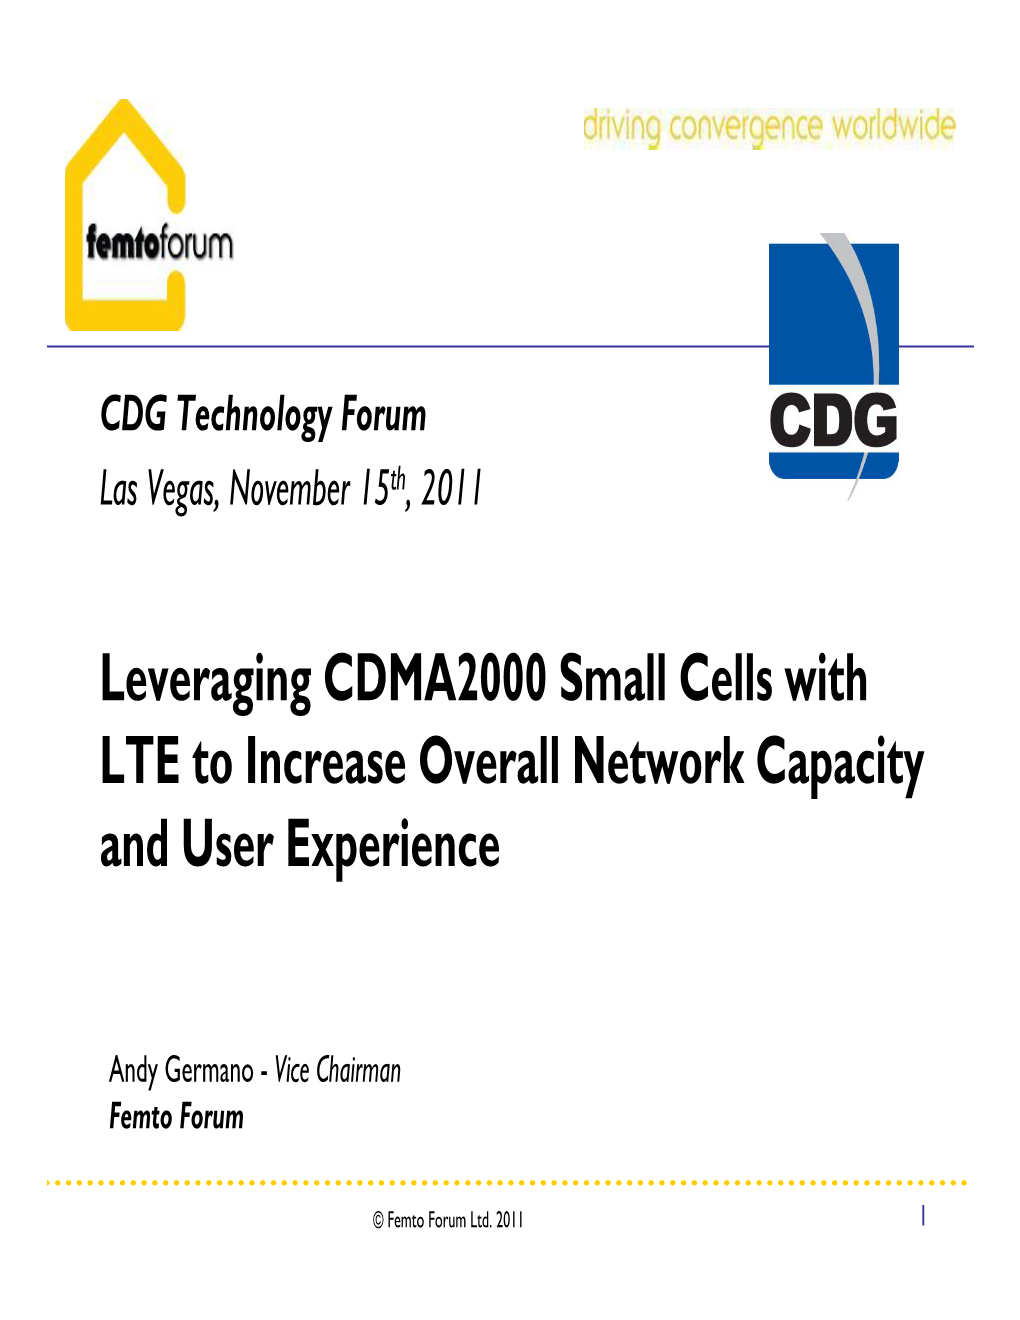 Leveraging CDMA2000 Small Cells with LTE to Increase Overall Network Capacity and User Experience